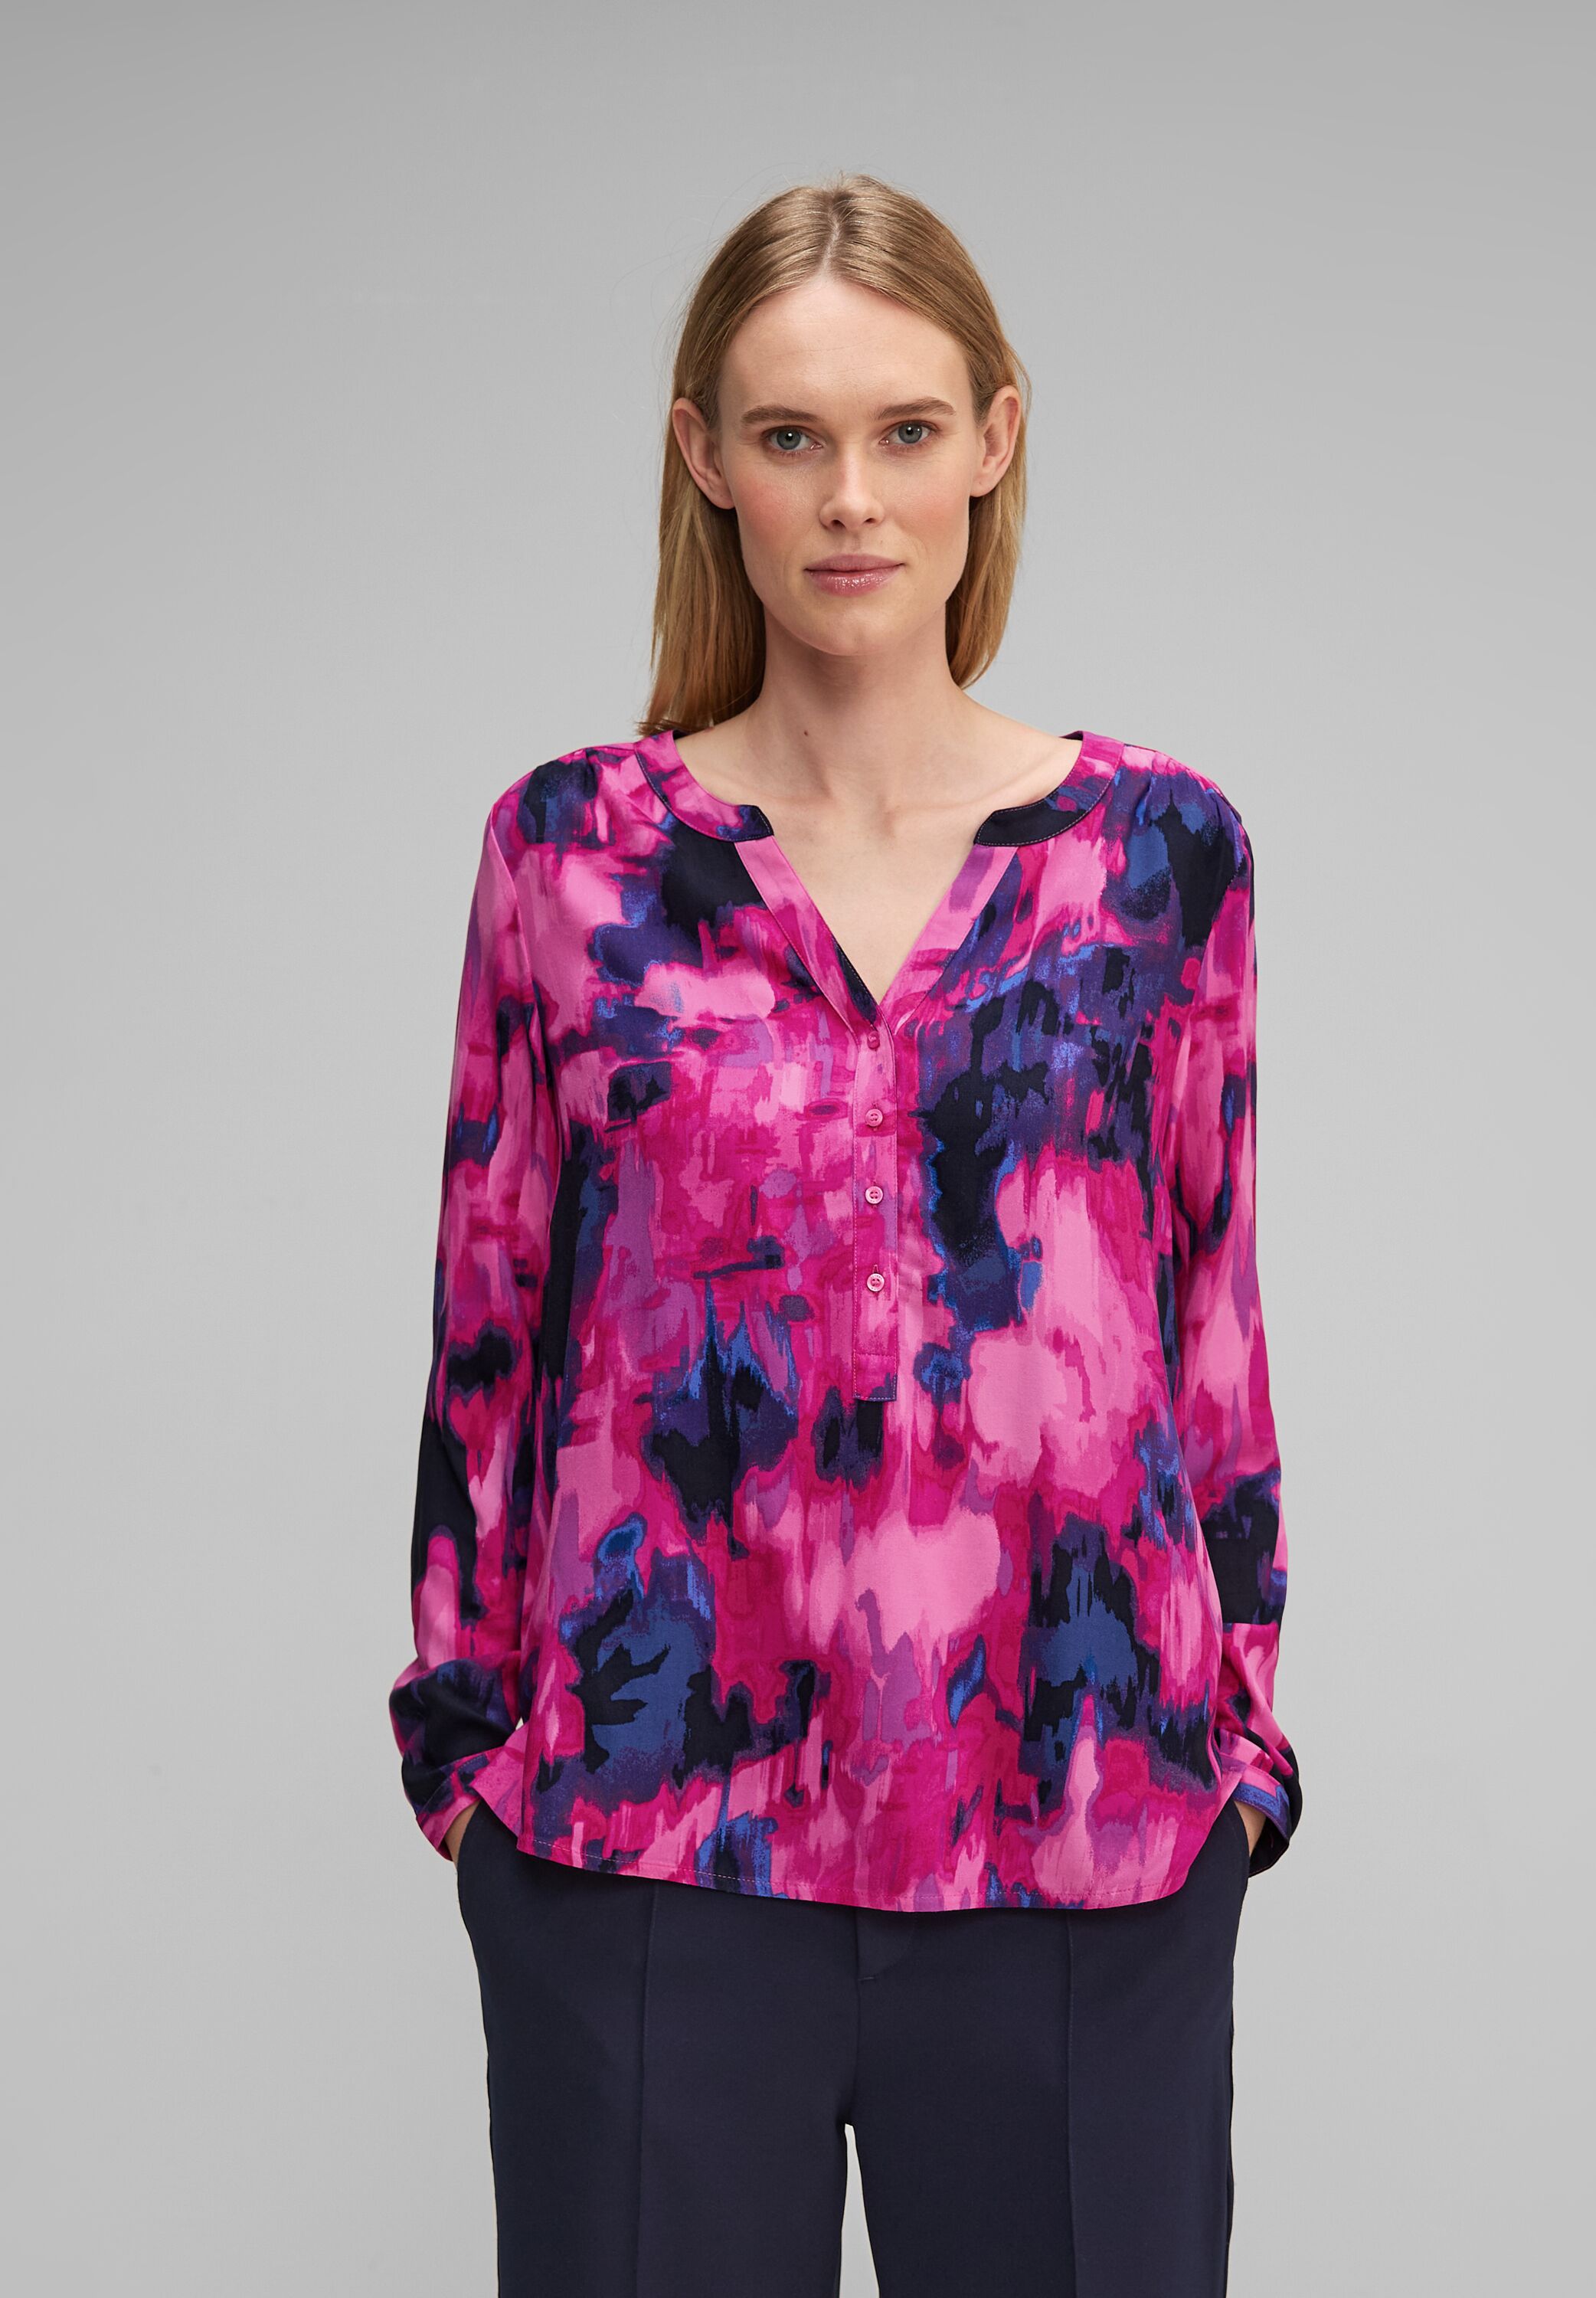 Bamika Bright Rundhalsbluse Cozy Pink reduziert Street in CONCEPT im - Mode SALE One A344378-35463